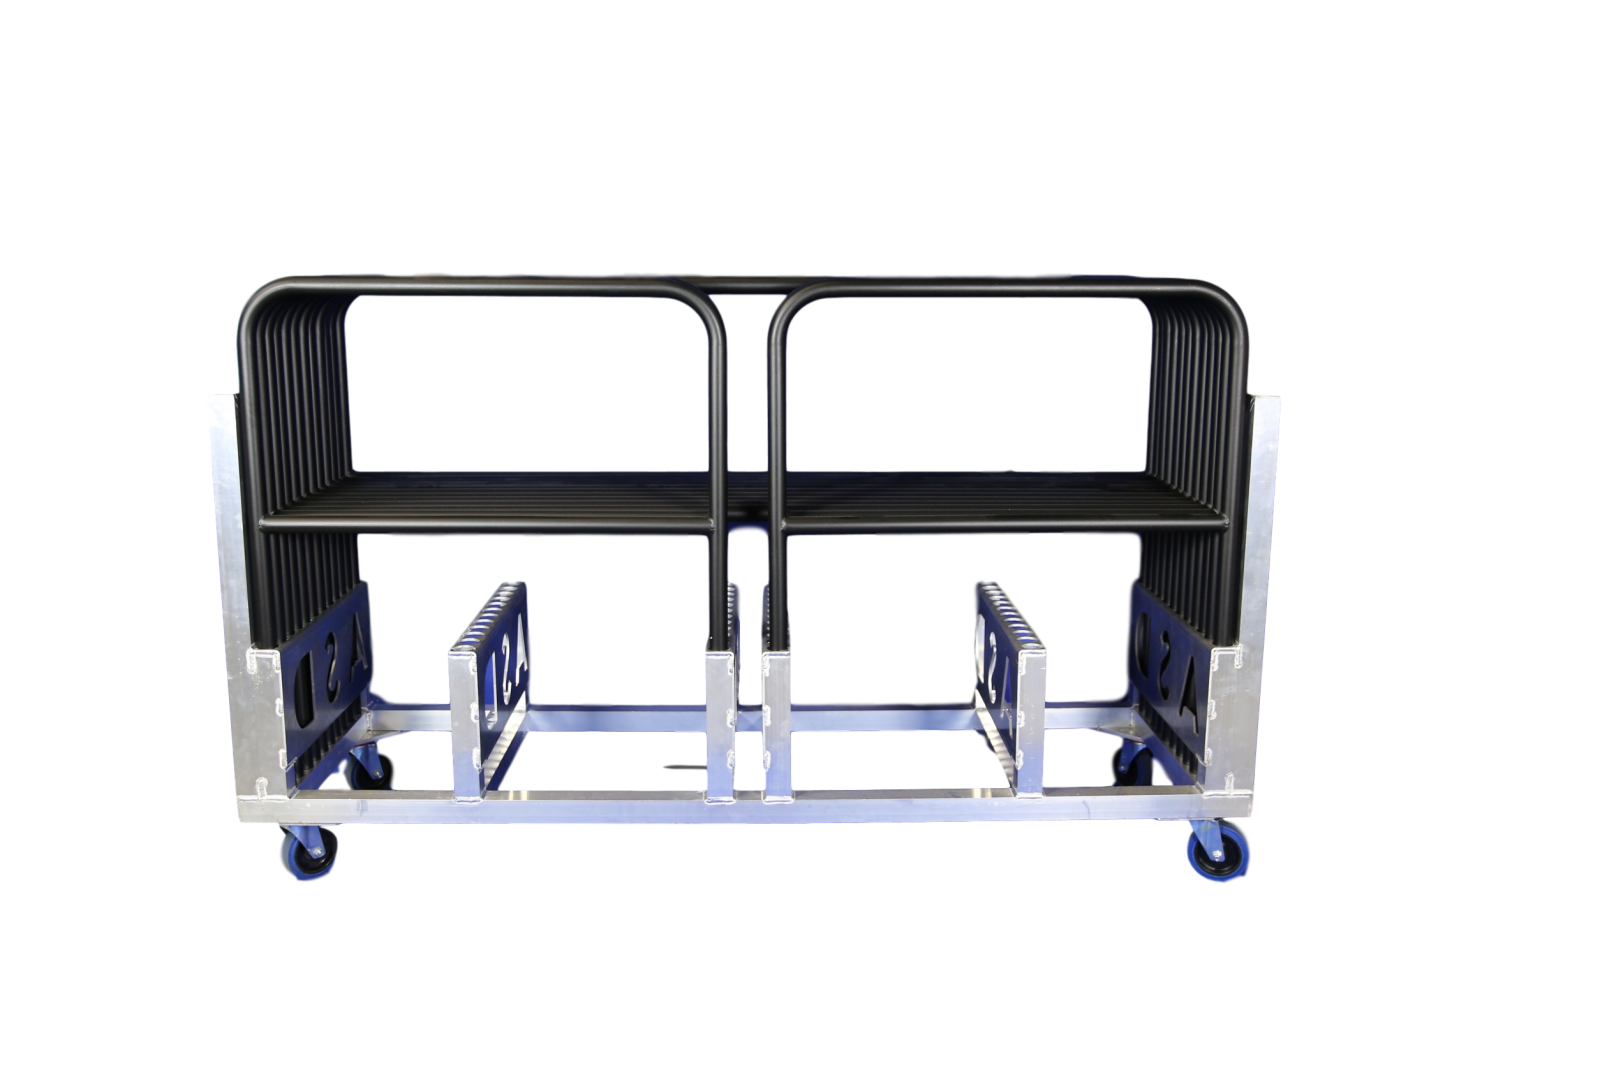 Rental of a complete kit with trolley. 24 linear meters of guardrail and handrail for ASD floor